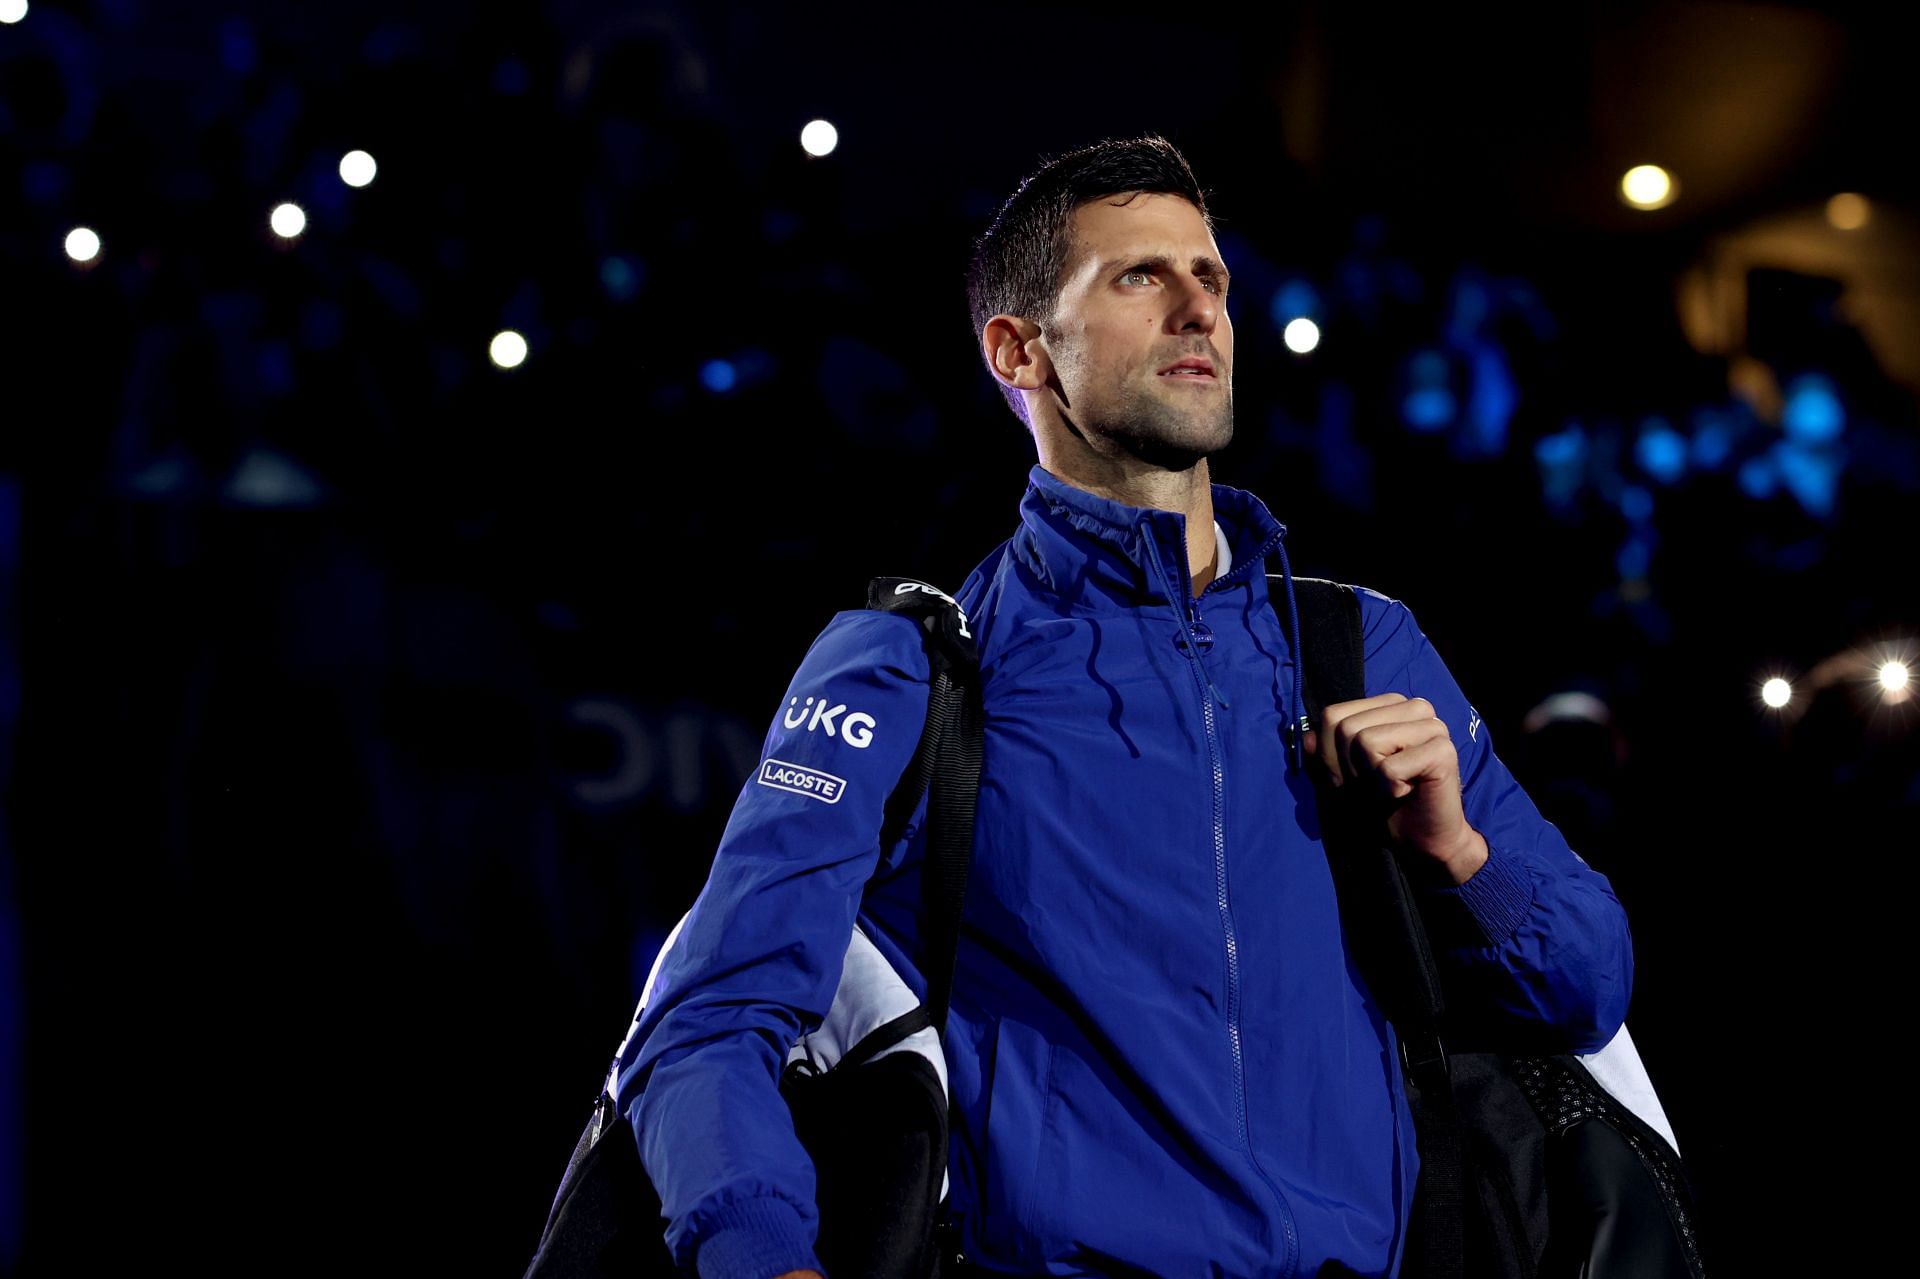 Novak Djokovic faces Andrey Rublev in the final of the Serbia Open